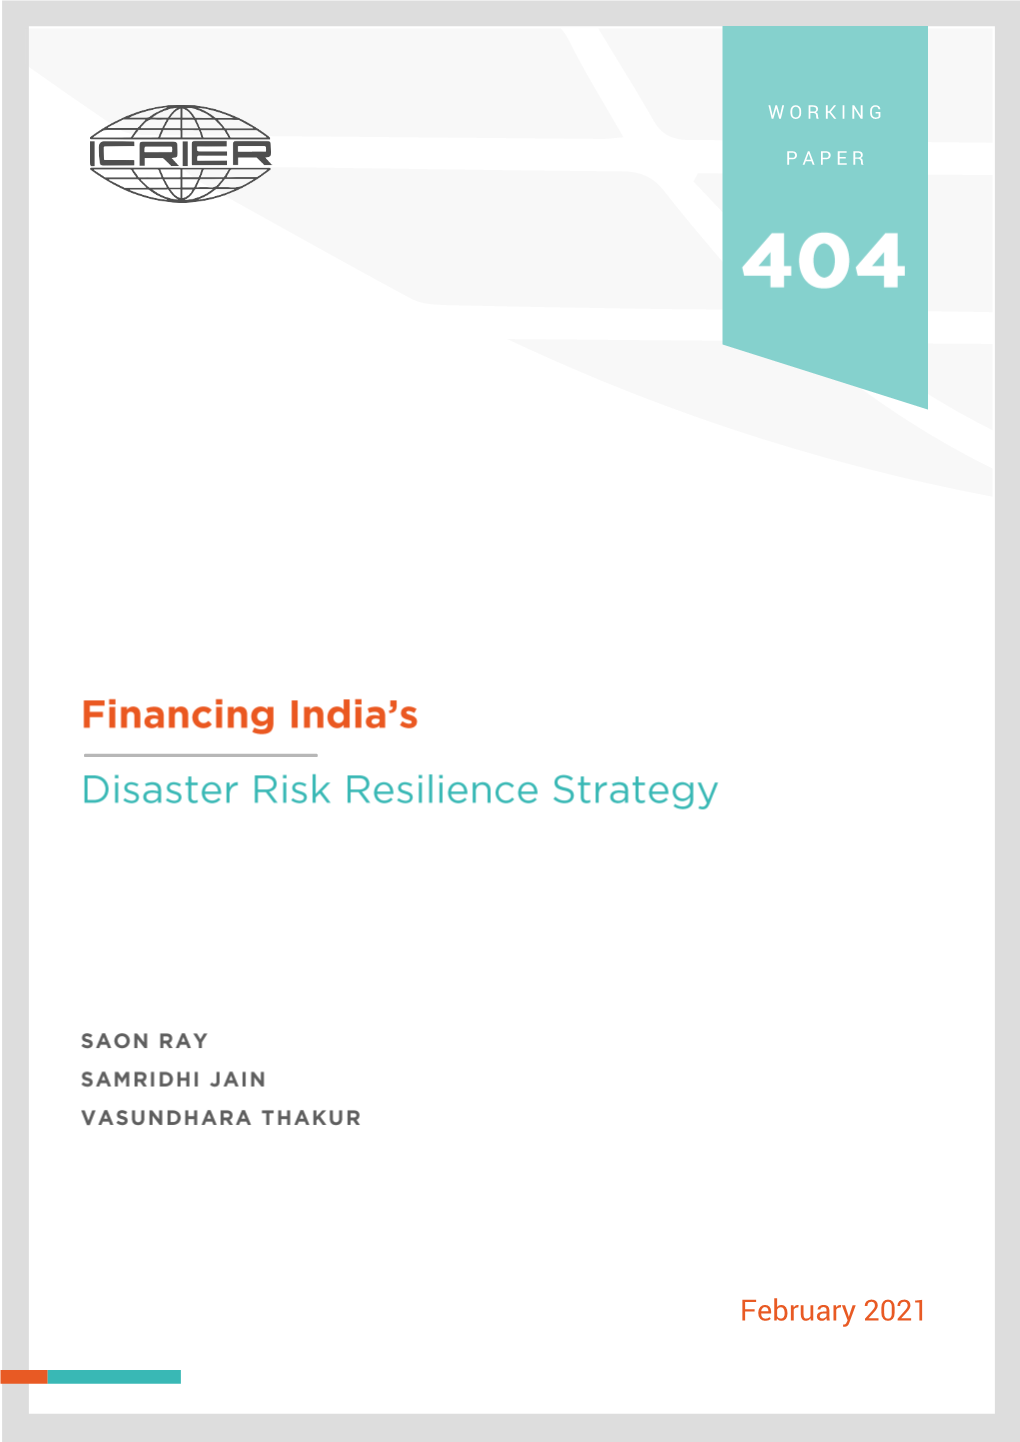 Financing India's Disaster Risk Resilience Strategy